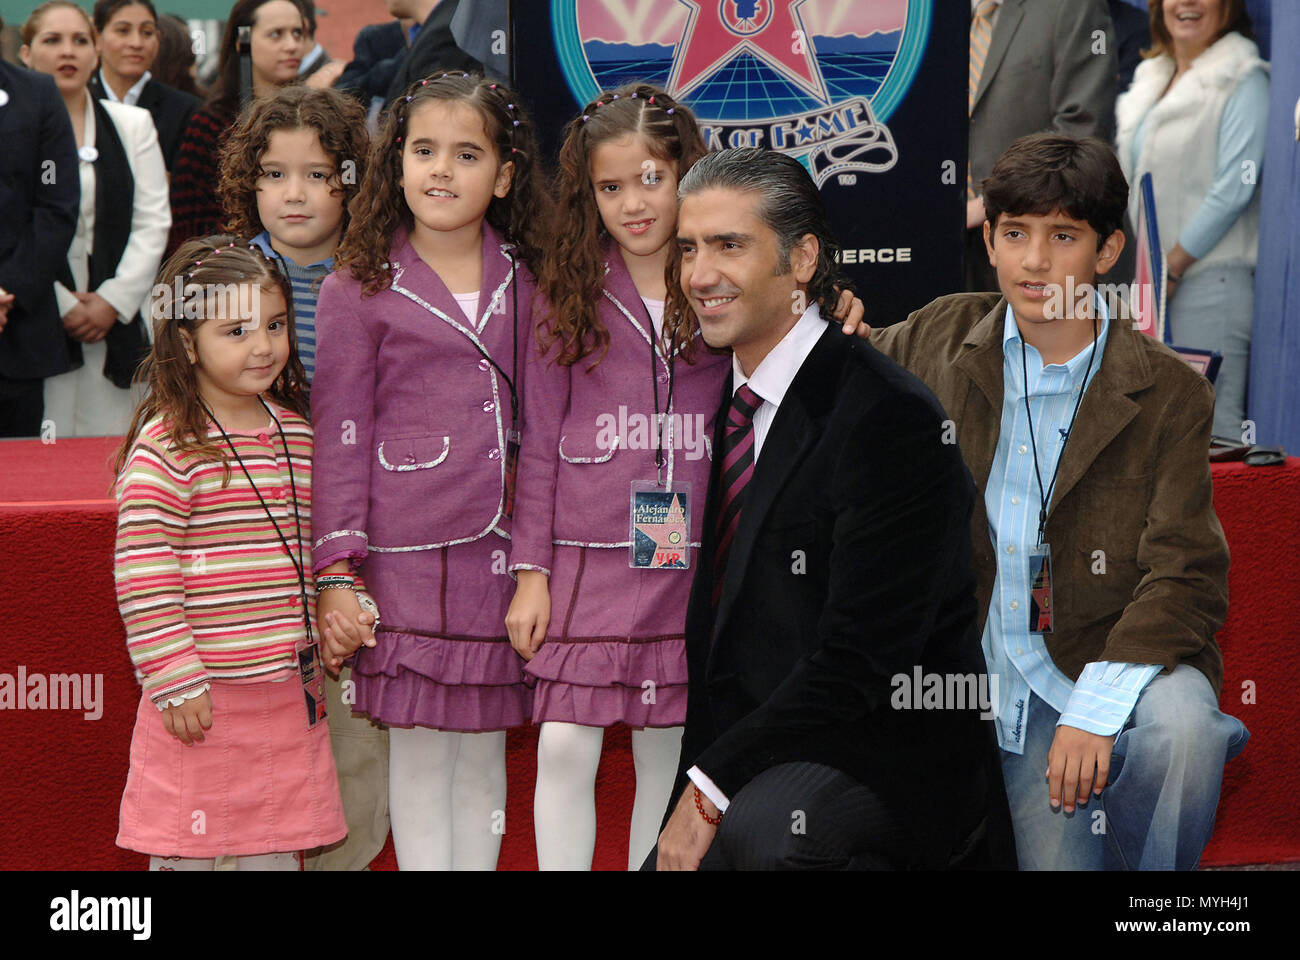 Alejandro Fernandez (posing with his daughters and son) was honored with a Star on the Hollywood Walk of Fame in Los Angeles. December 2, 2005.          -            FernandezAlejandro family star027.jpgFernandezAlejandro family star027  Event in Hollywood Life - California, Red Carpet Event, USA, Film Industry, Celebrities, Photography, Bestof, Arts Culture and Entertainment, Topix Celebrities fashion, Best of, Hollywood Life, Event in Hollywood Life - California, movie celebrities, TV celebrities, Music celebrities, Topix, Bestof, Arts Culture and Entertainment, Photography,    inquiry tsuni Stock Photo